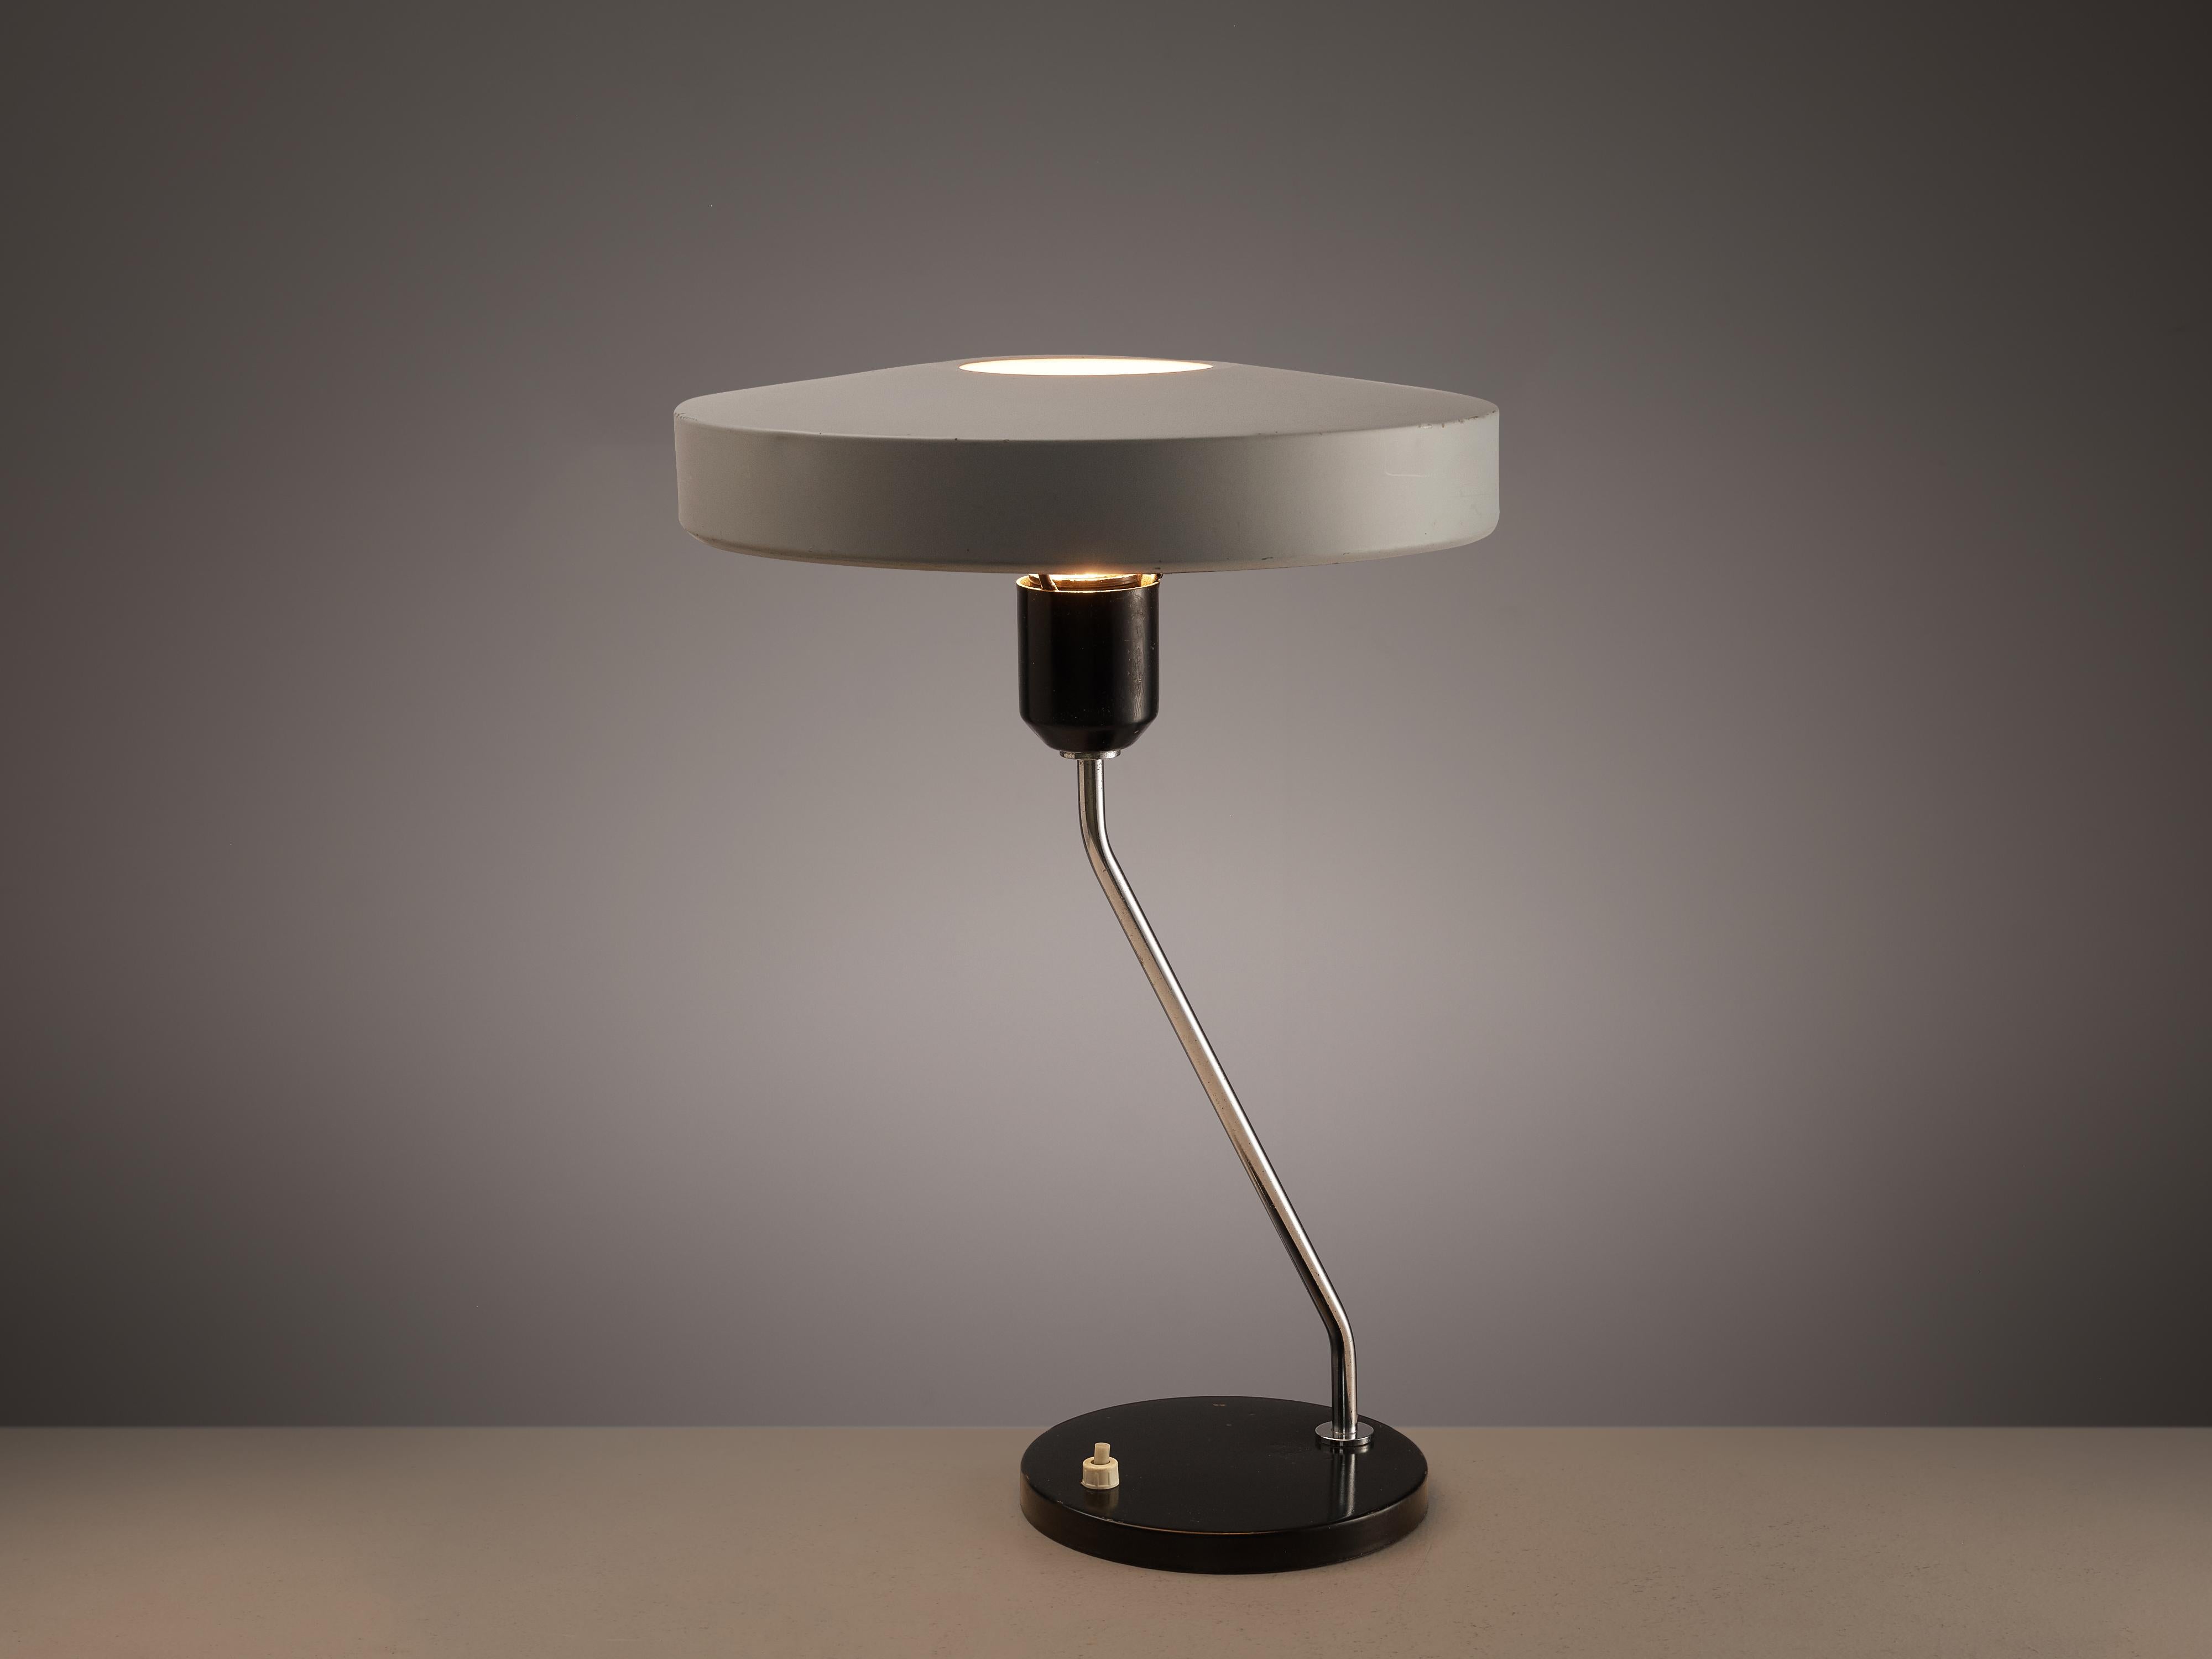 Louis Kalff for Philips, desk lamp ‘Romeo’, metal, The Netherlands, 1960s

Beautiful desk lamp by Dutch architect and designer Louis Kalff. He is known for his lamp designs for the Dutch company Philips. During his career, Kalff designed various